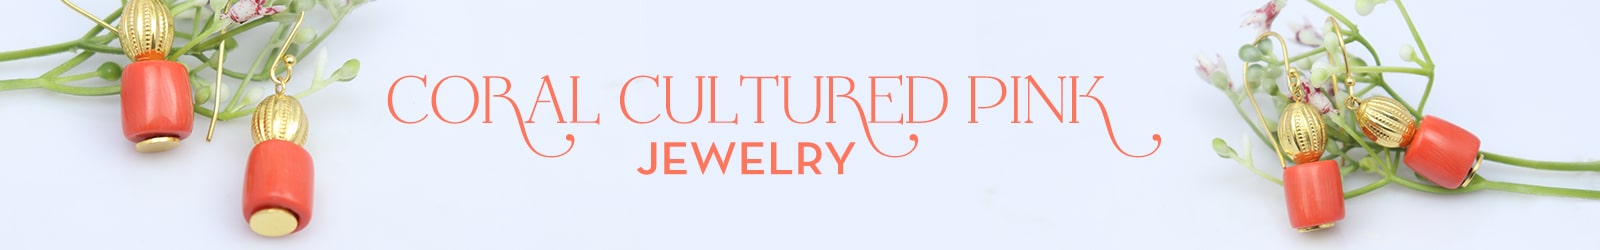 Coral Cultured Pink Jewelry